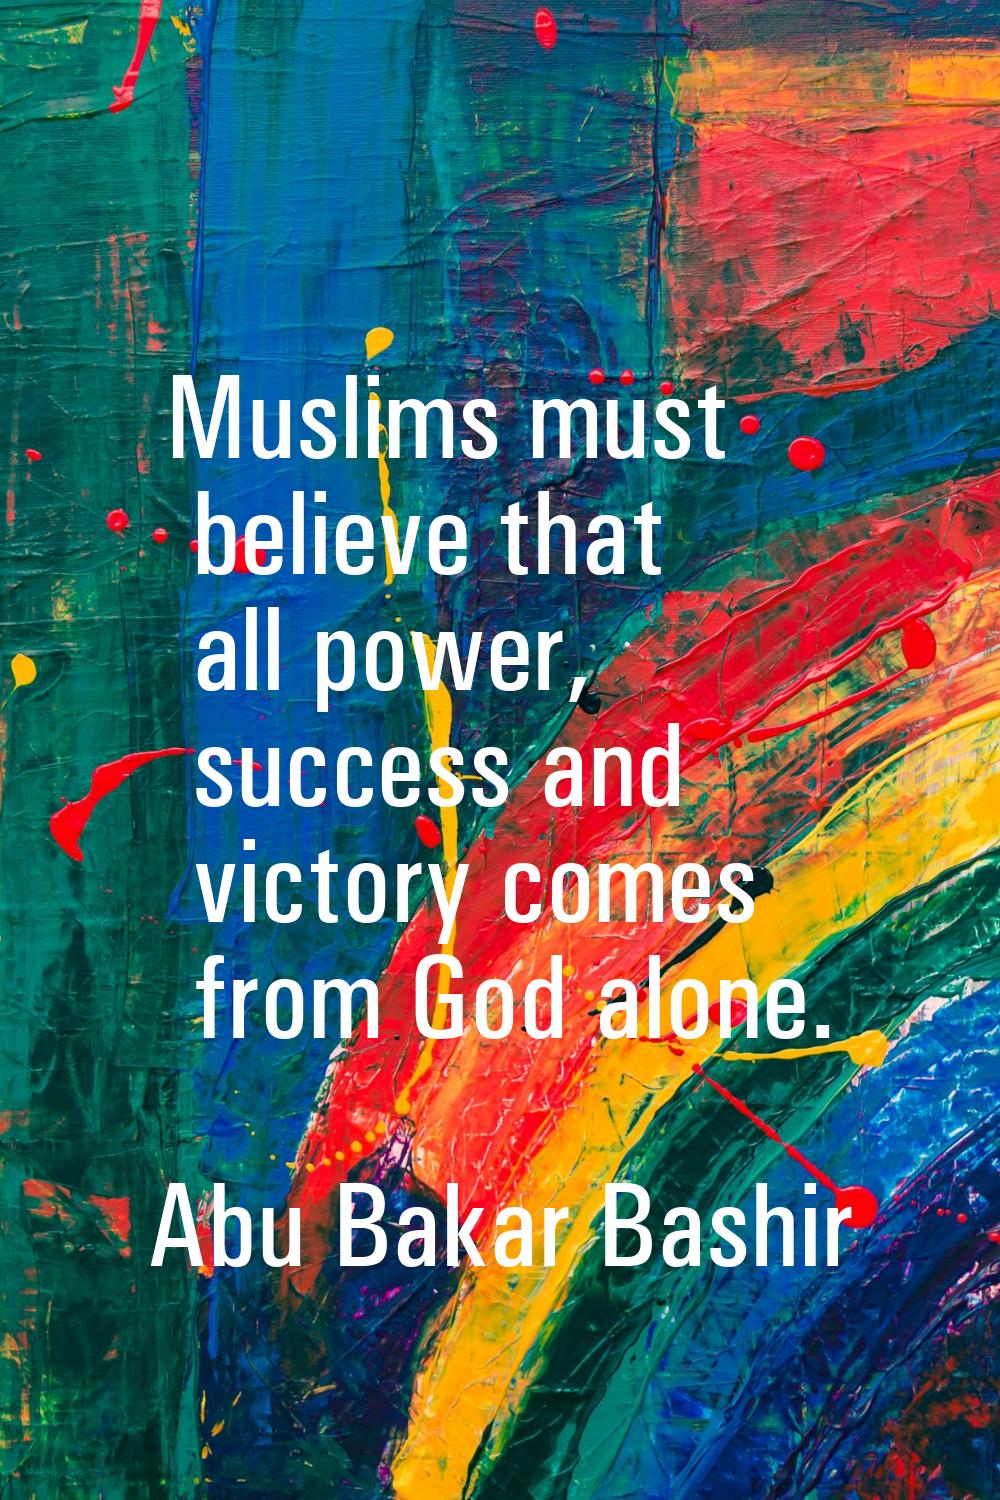 Muslims must believe that all power, success and victory comes from God alone.